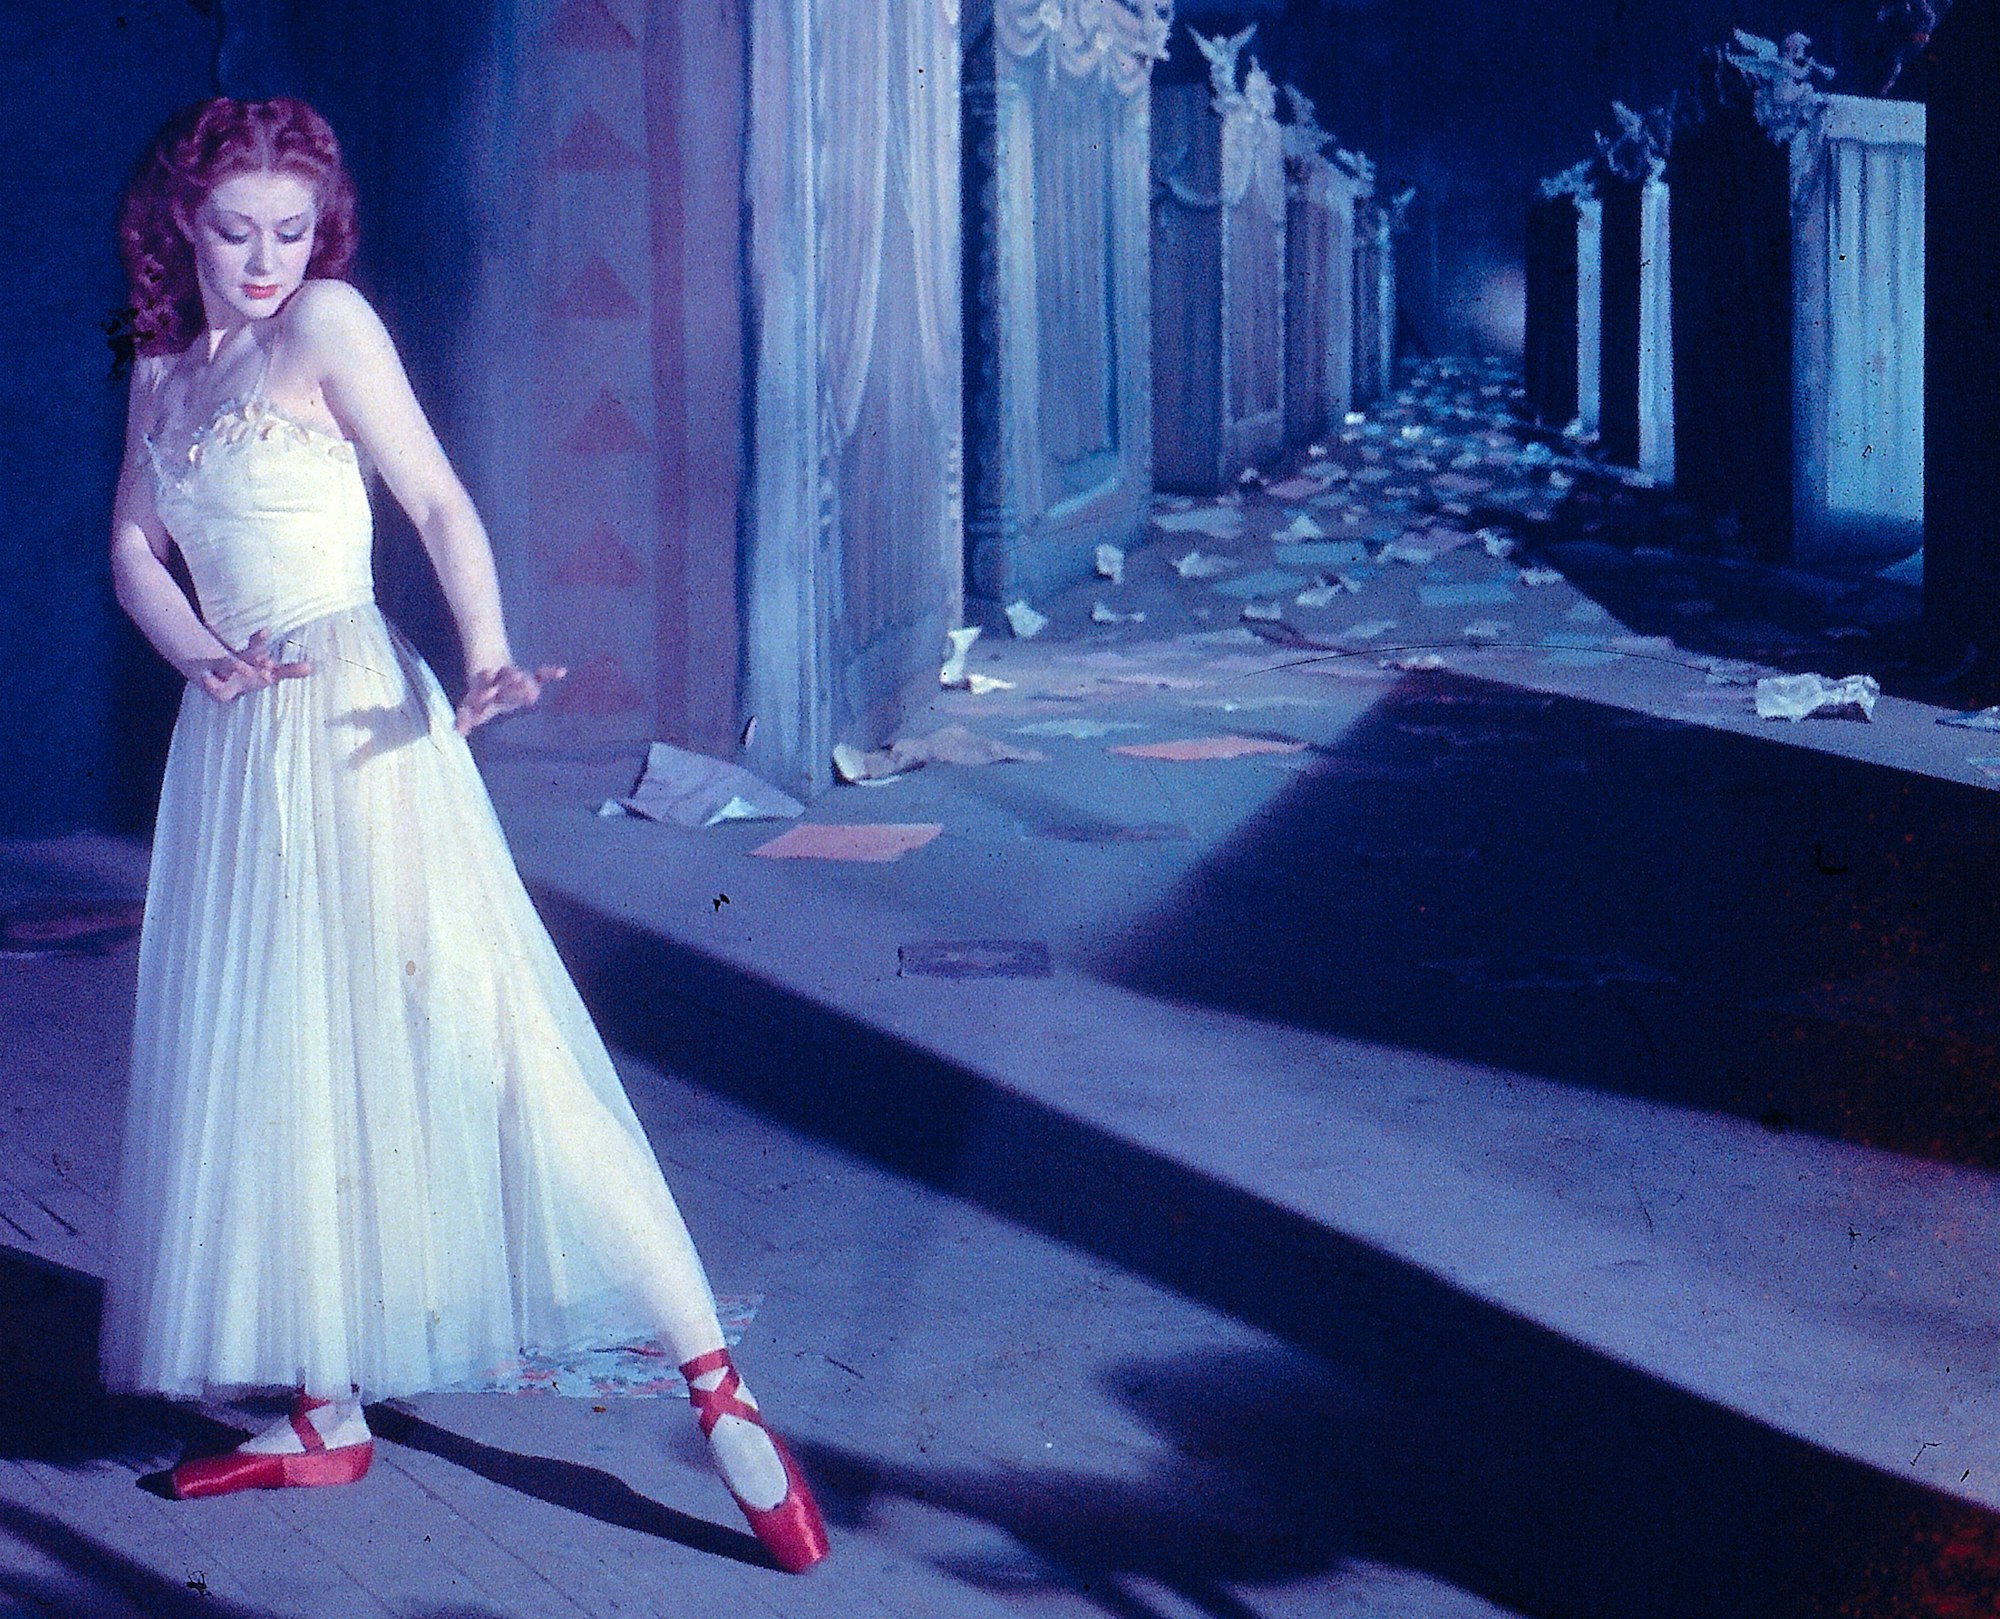 A light skinned woman in a ballet dress and red pointe shoes dances in front of a set strewn with pieces of paper and shadows.